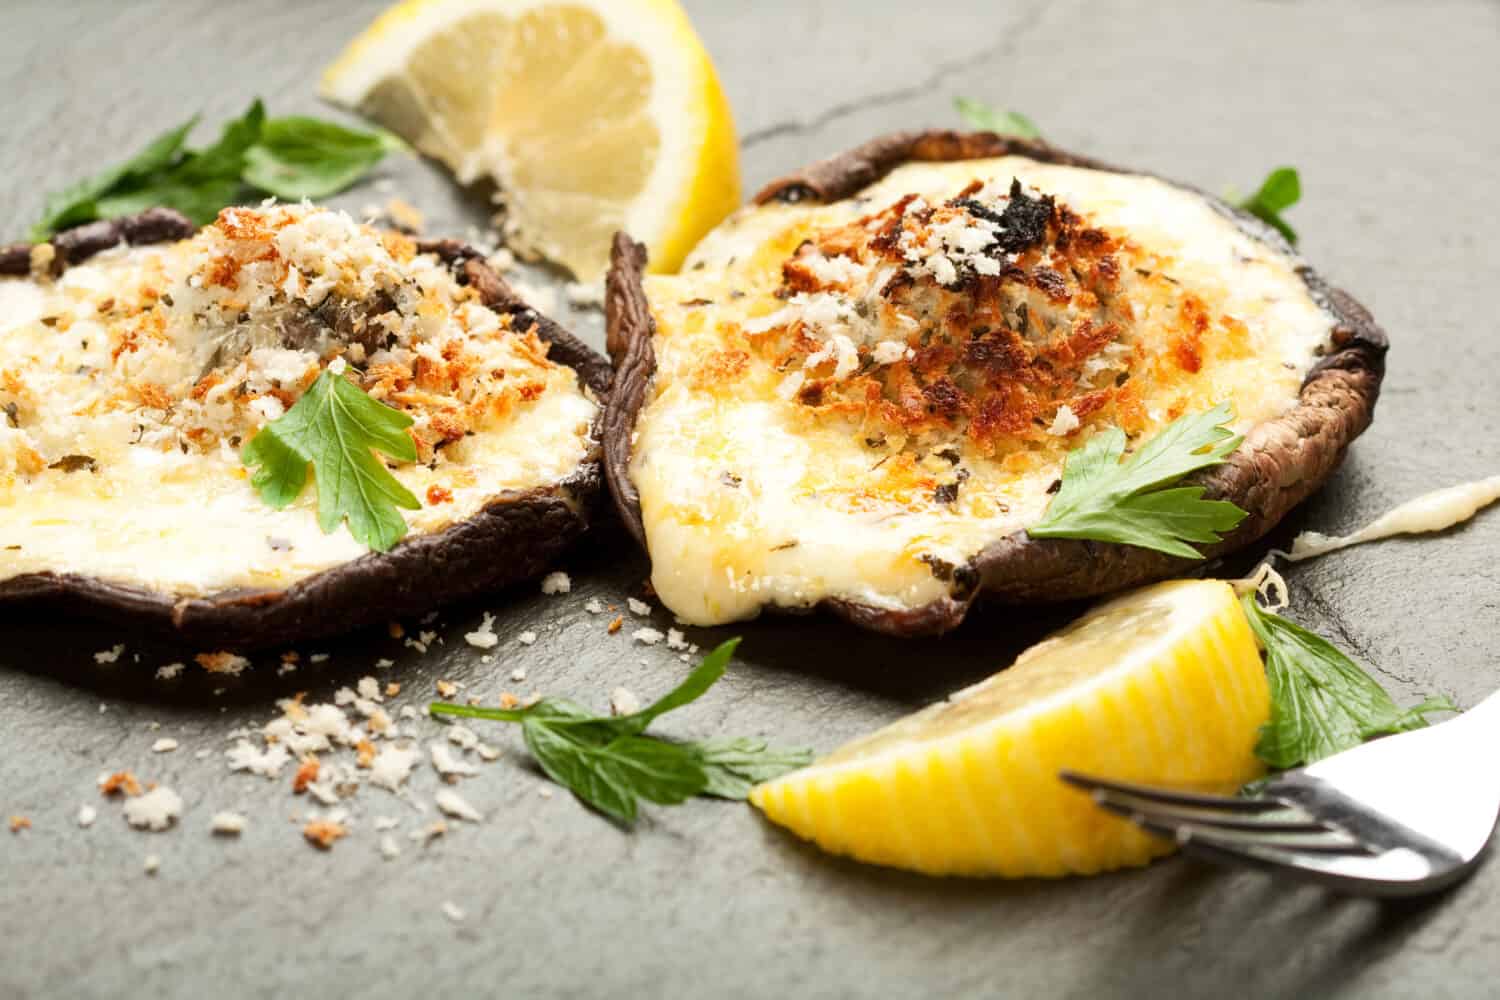 Mushrooms stuffed with four cheeses and topped with crispy panko bread crumbs